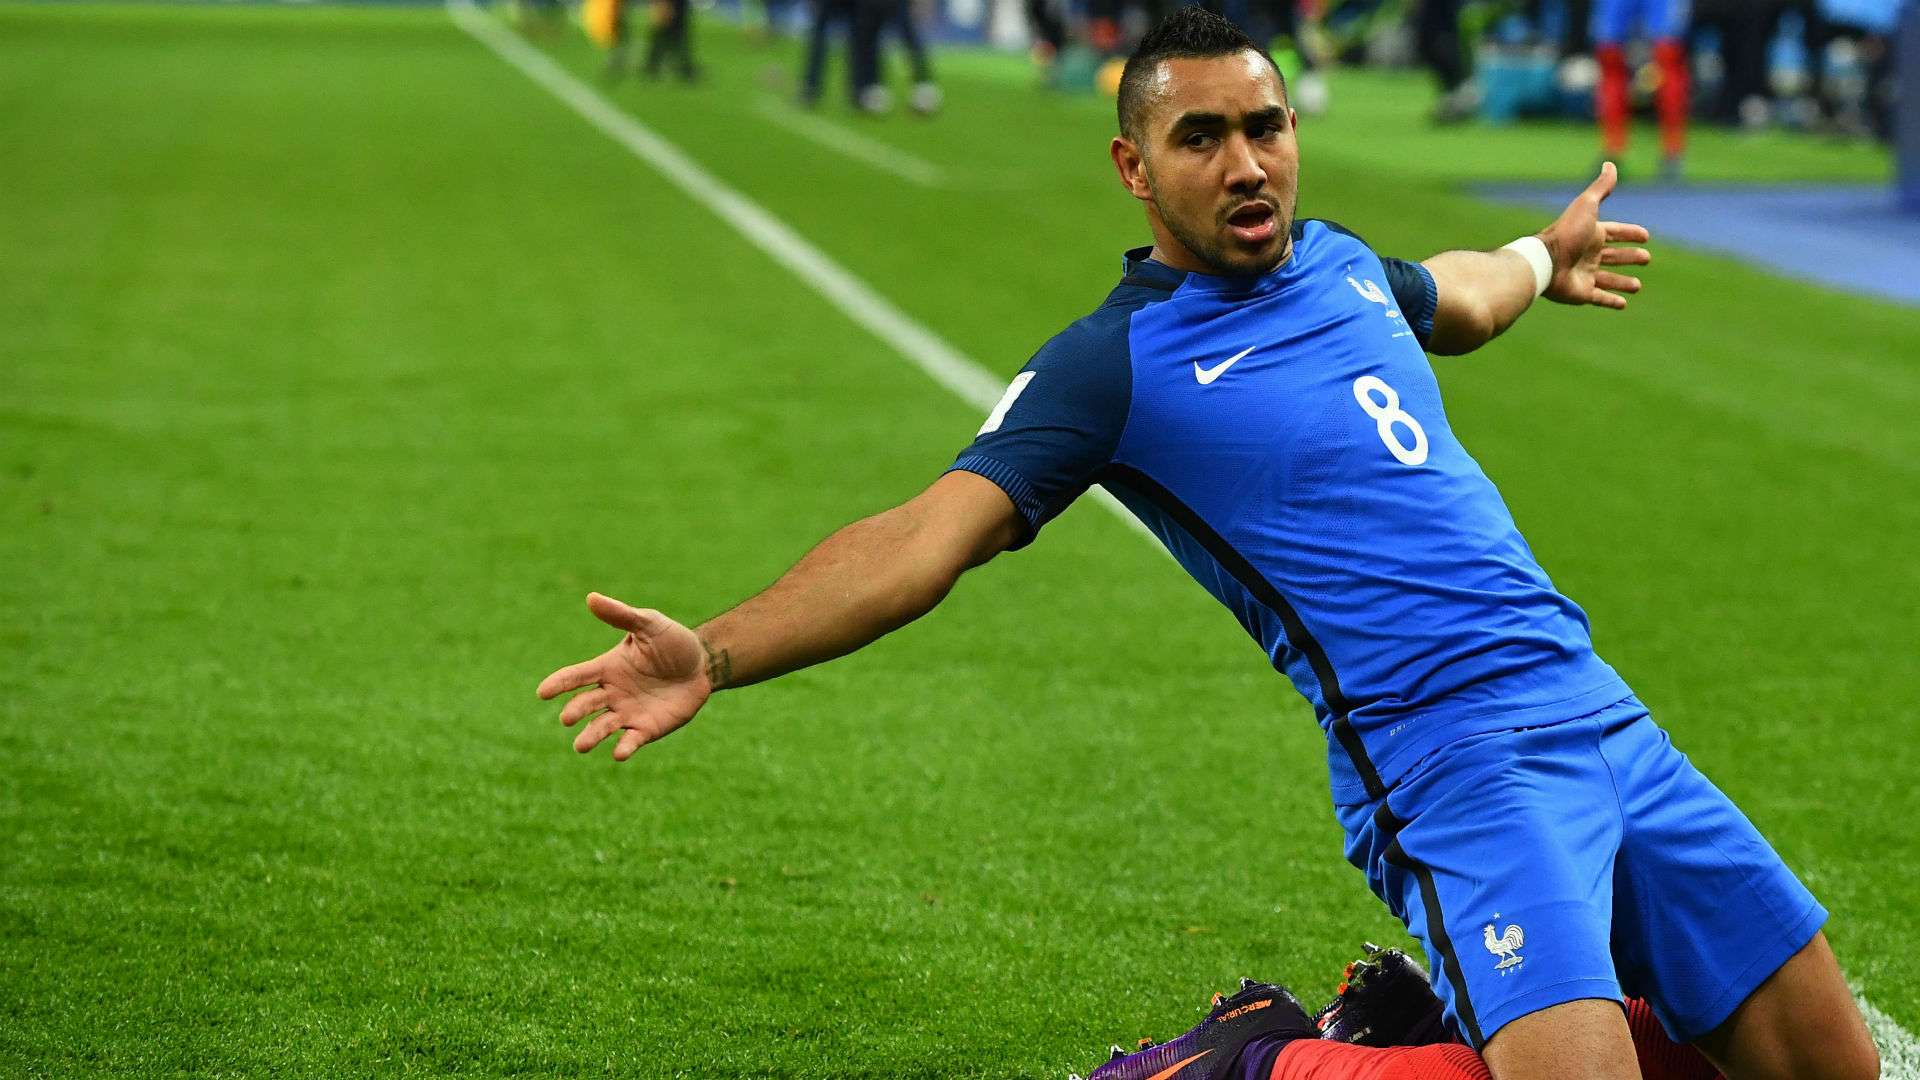 Dimitri Payet France Sweden World Cup Qualifiers 11112016